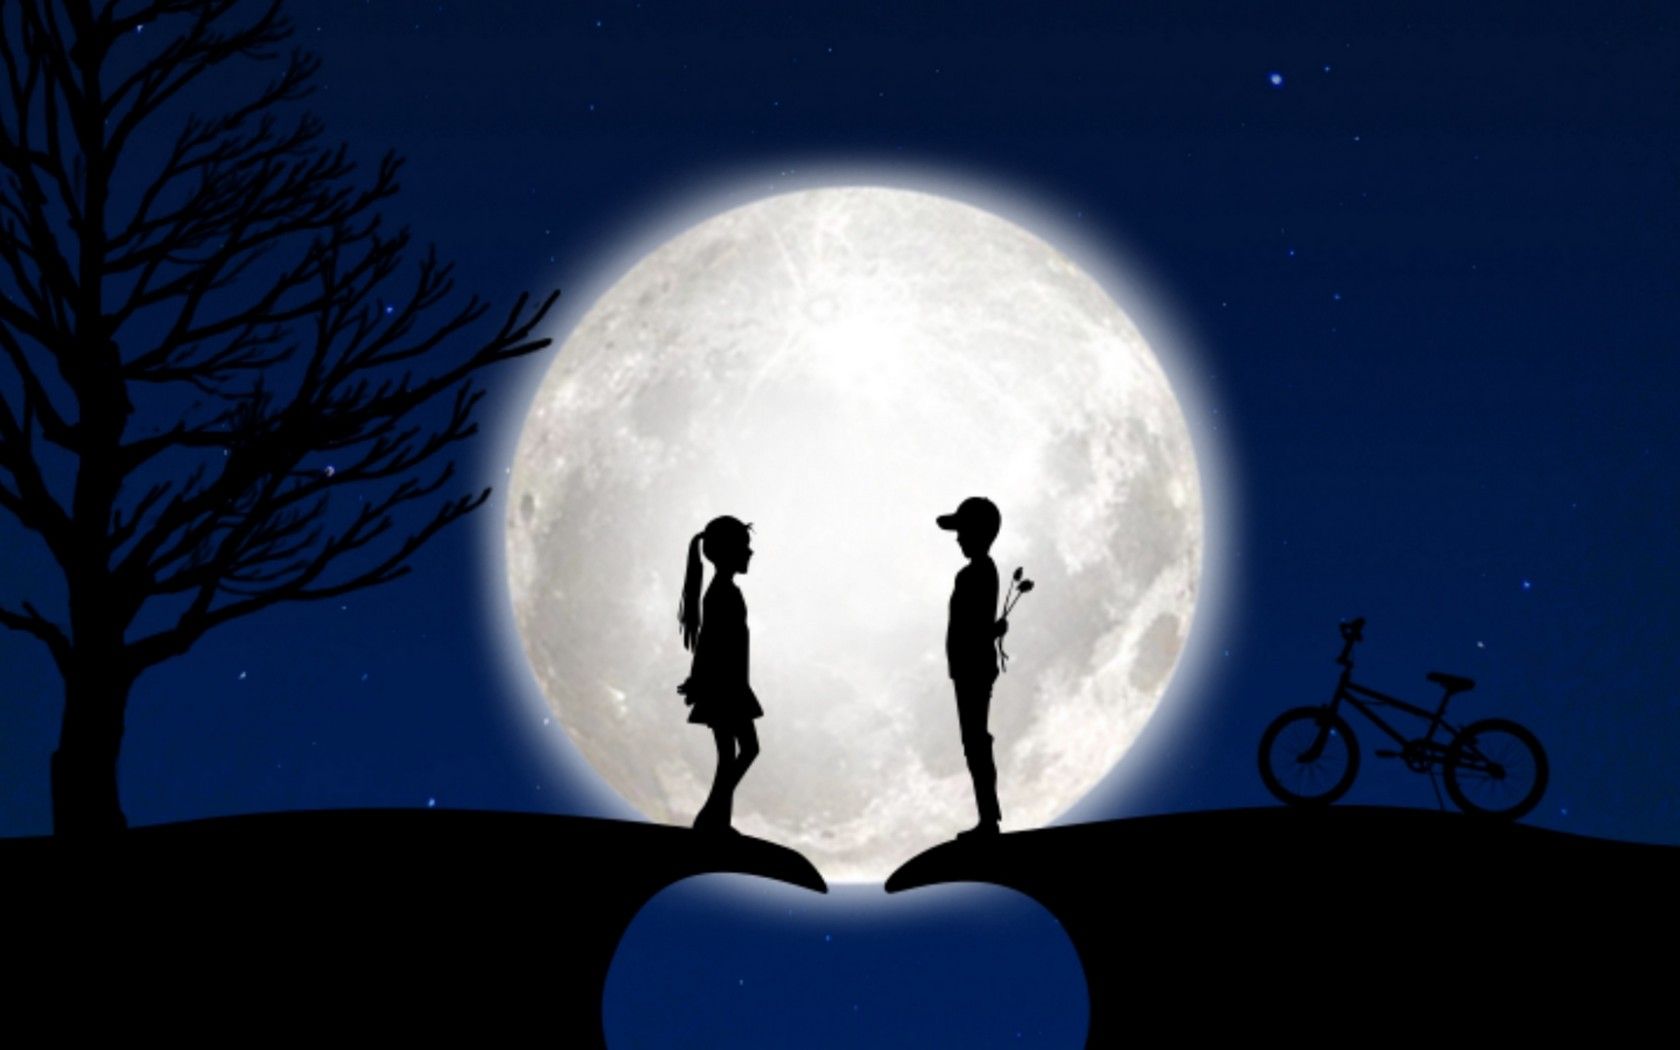 Couple in the light of the moon HD Wallpaper 1680x1050